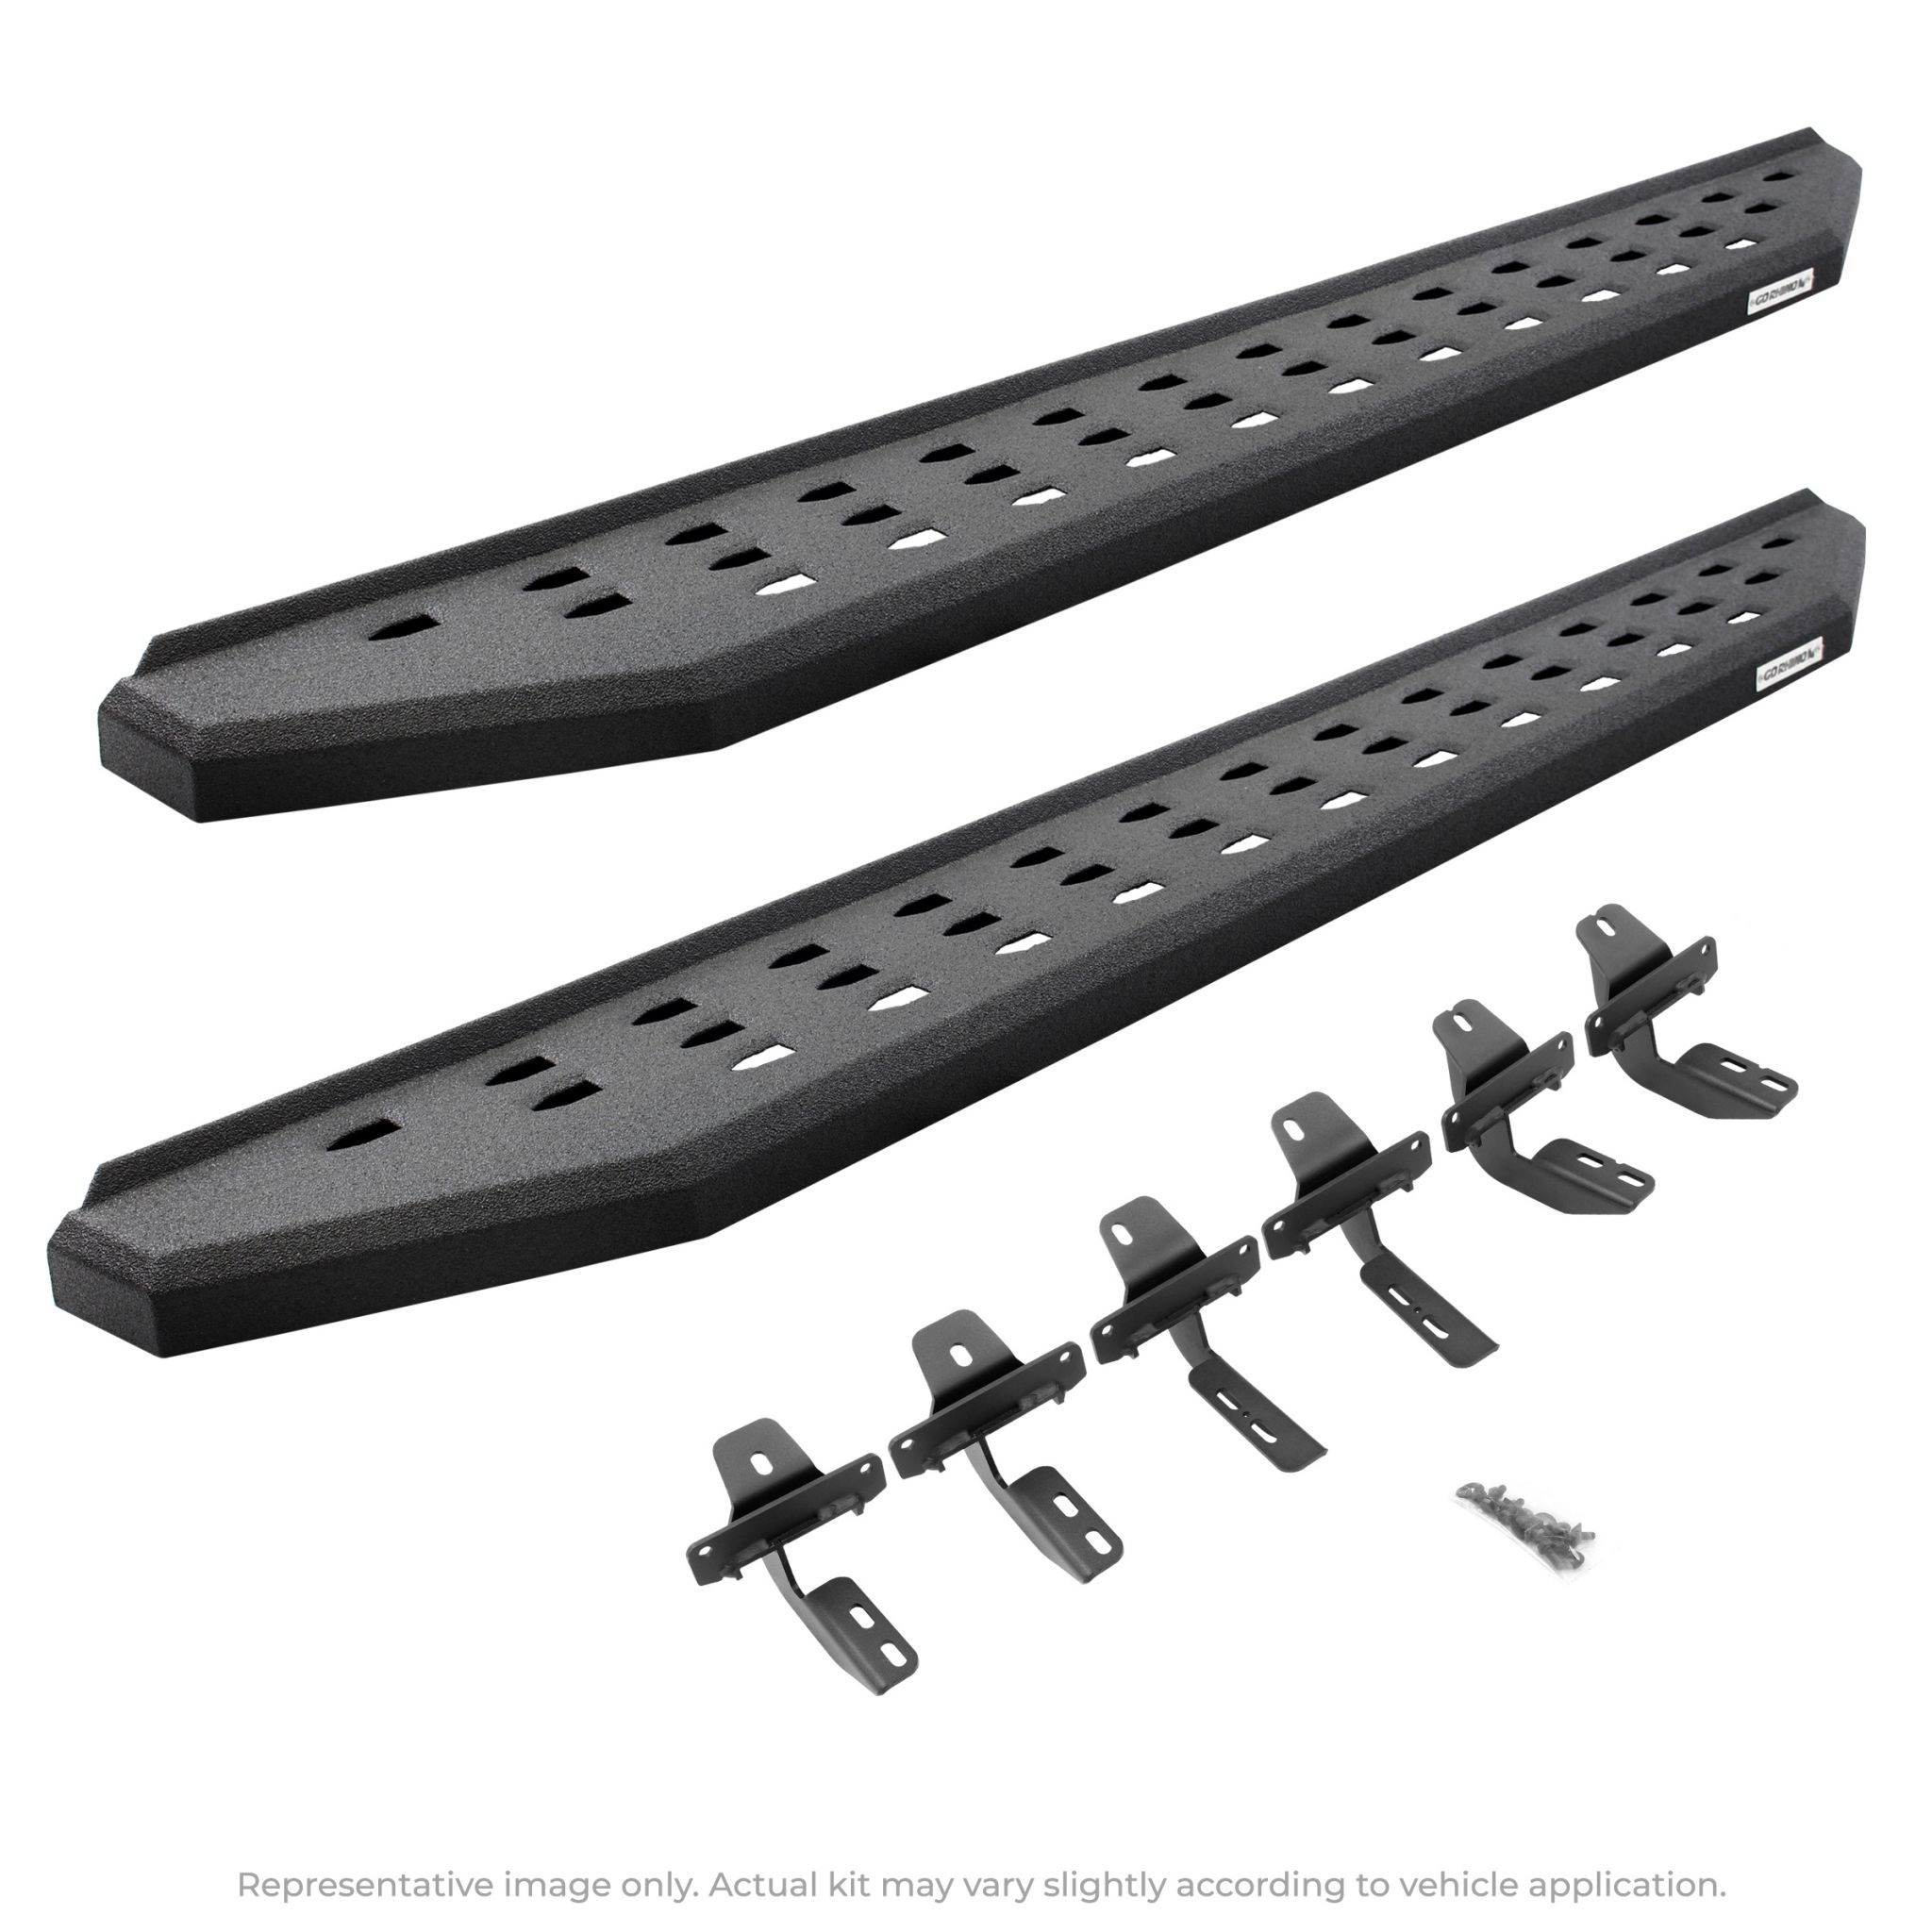 Go Rhino - 69404280T - RB20 Running Boards With Mounting Brackets - Protective Bedliner Coating